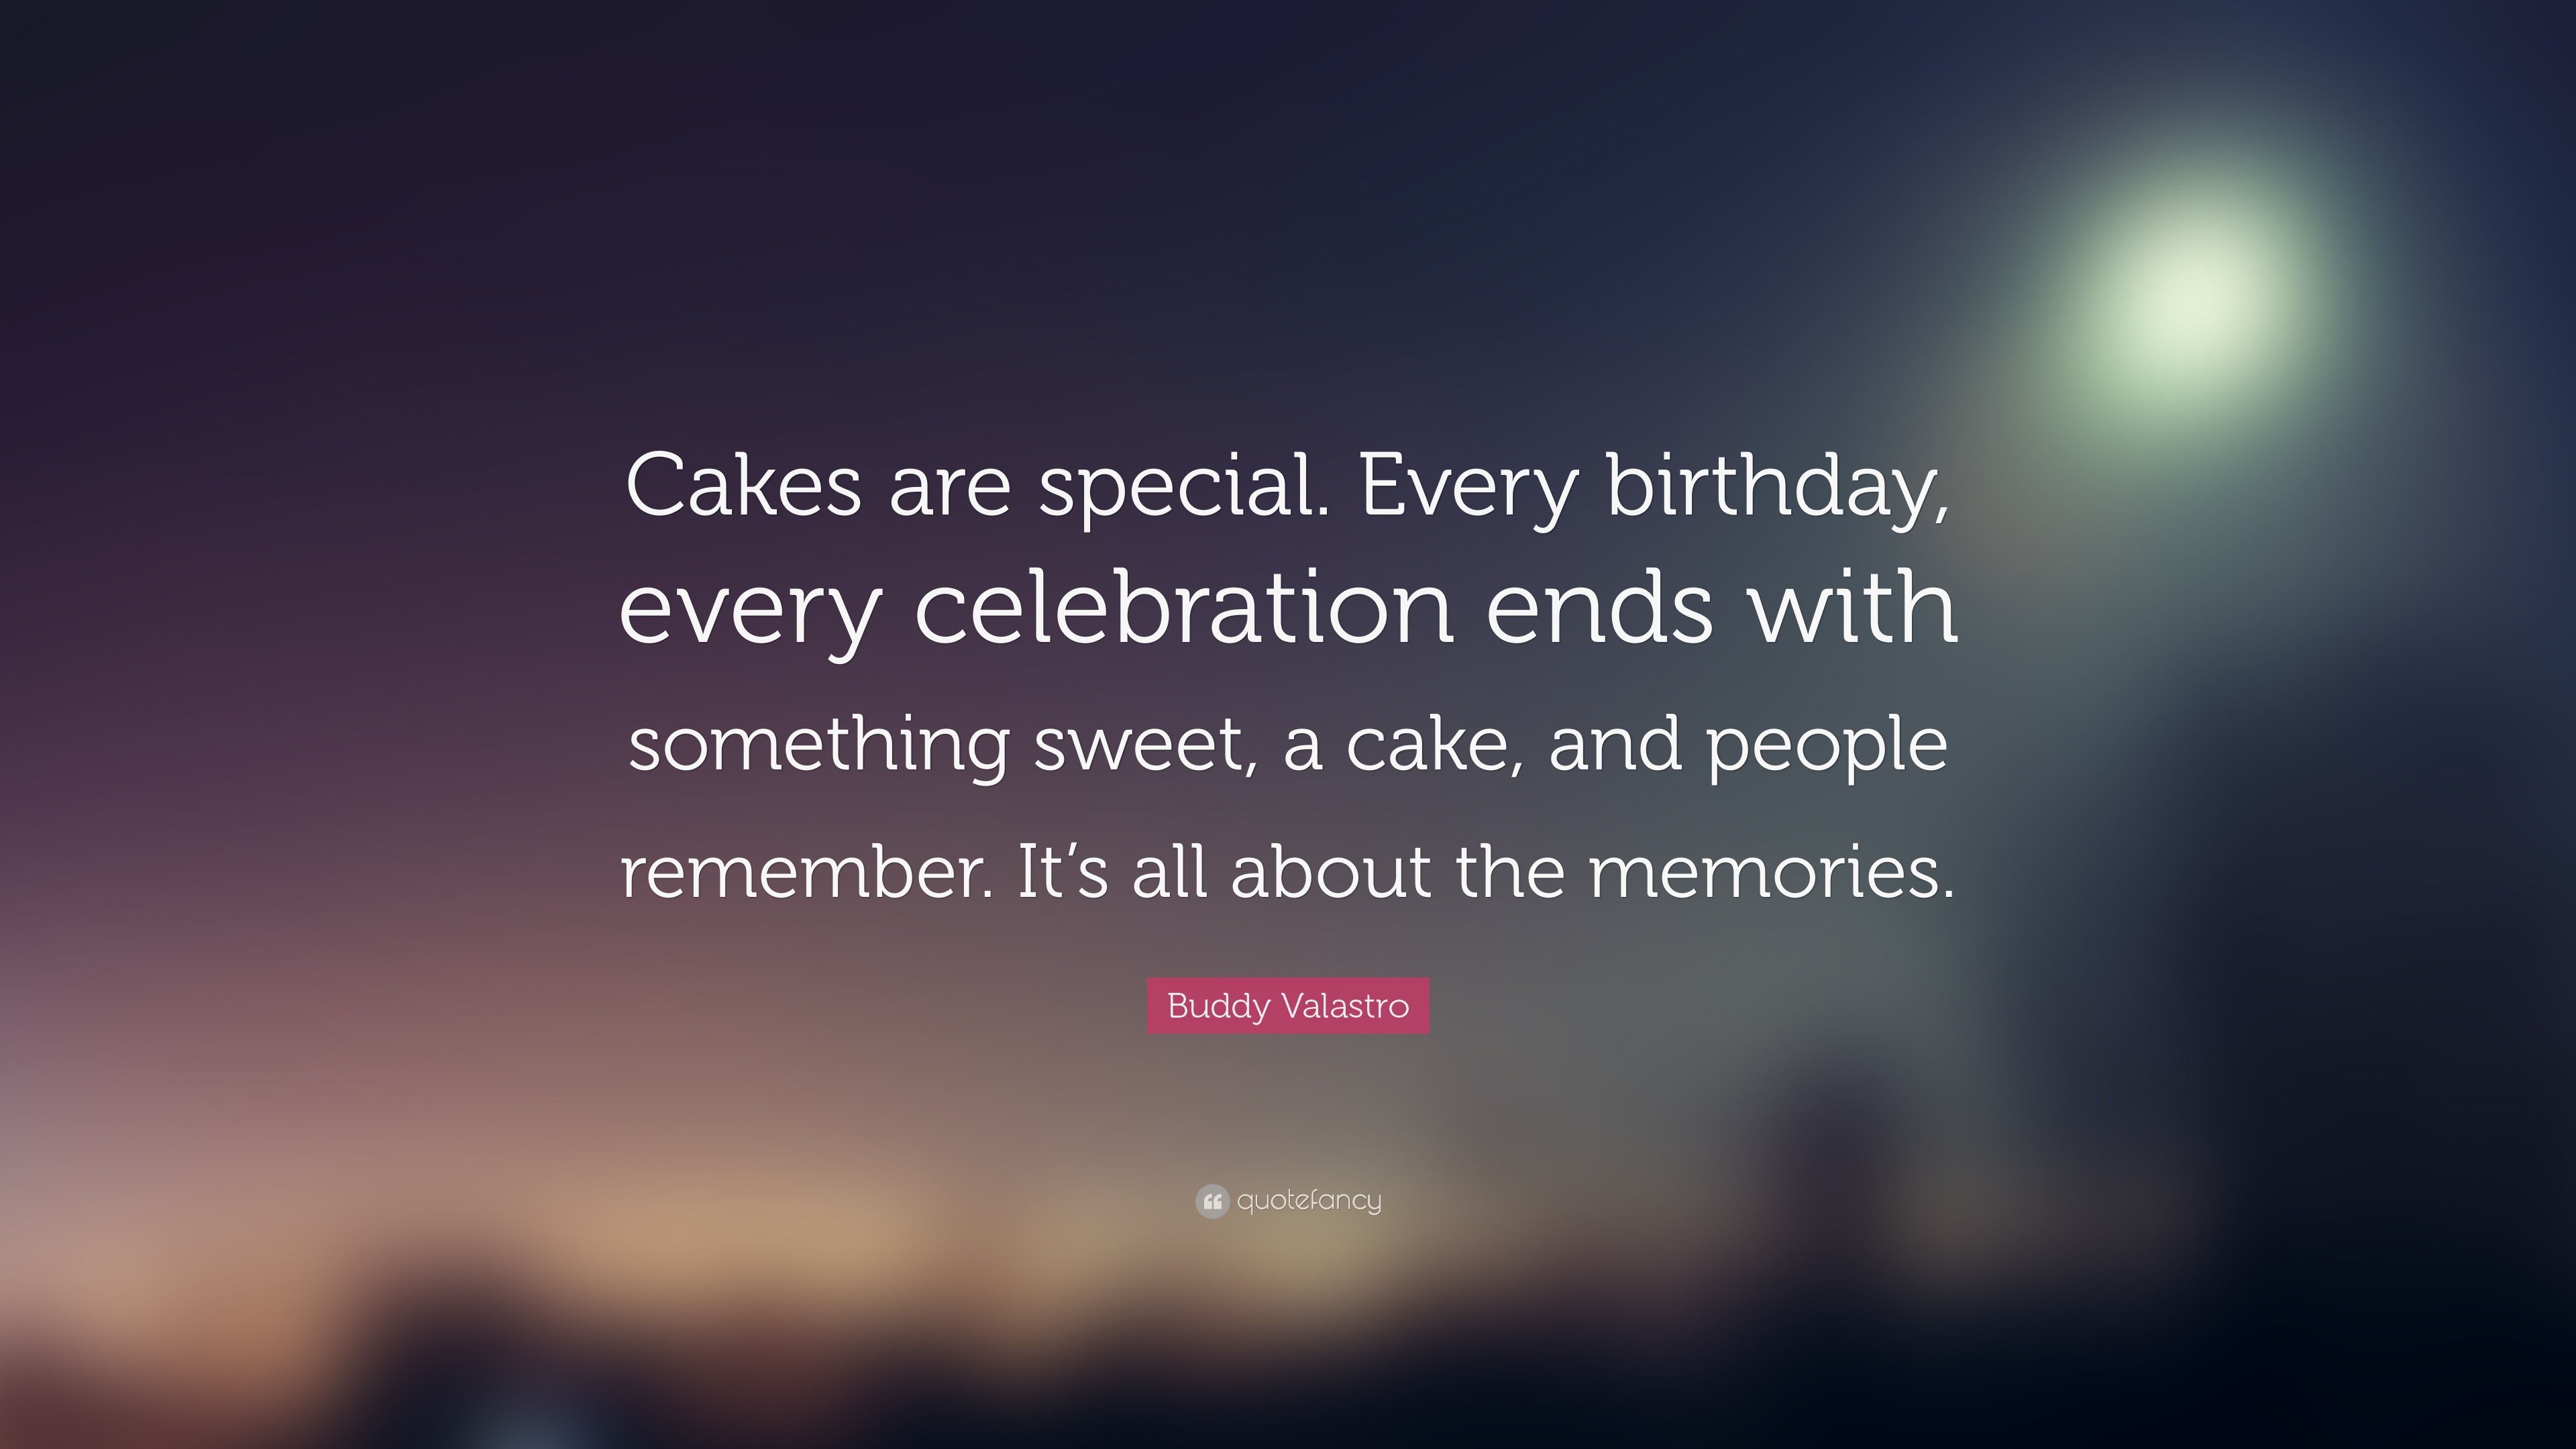 250+ Delicious Cake Quotes And Sayings – Baking Like a Chef